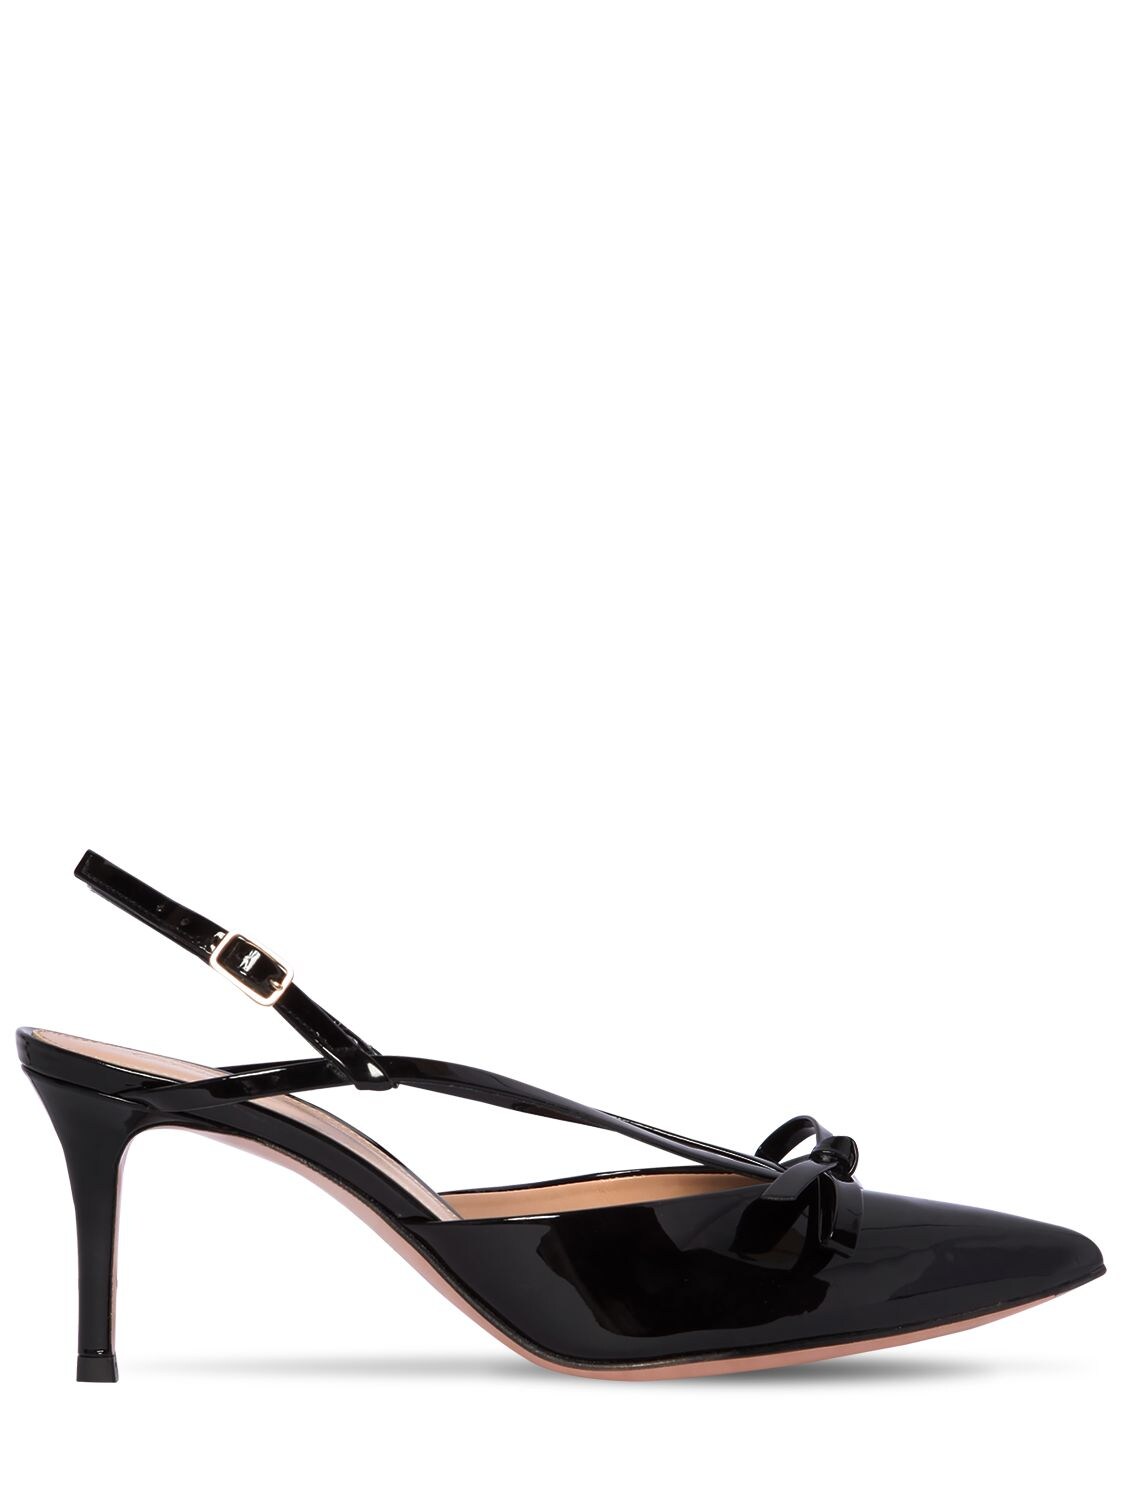 70mm Patent Leather Sling Back Pumps